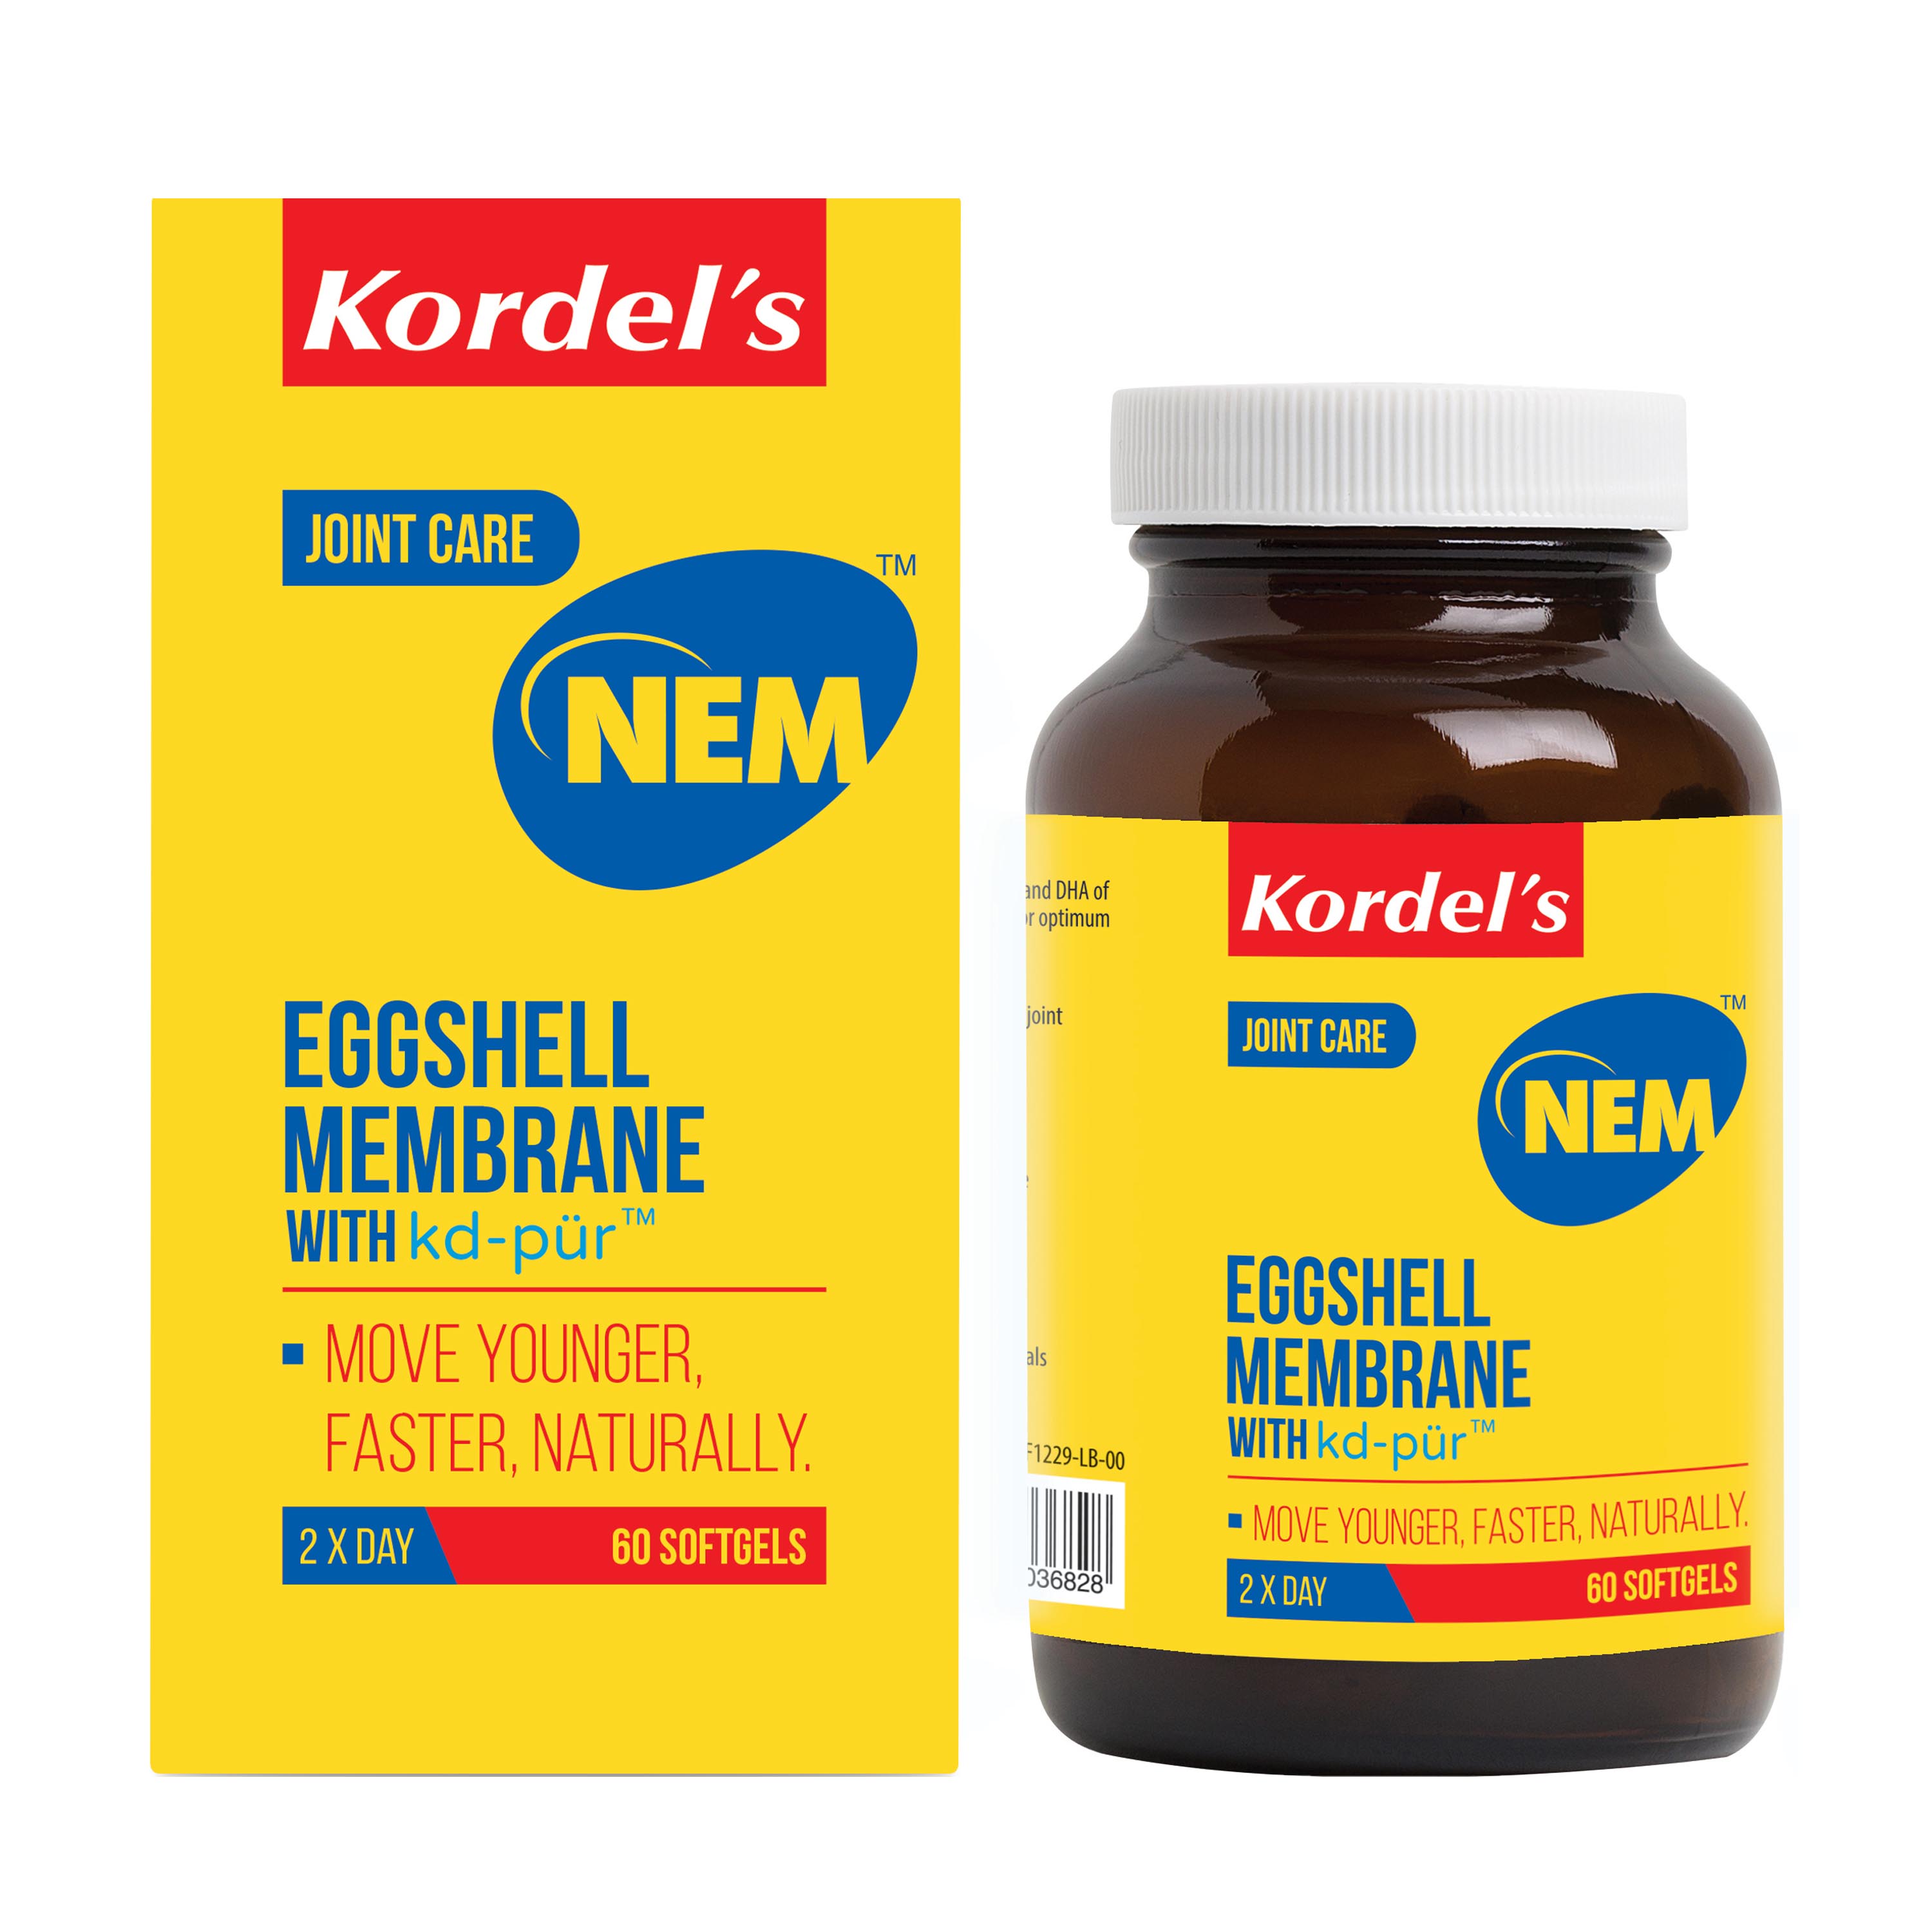 Kordel's Natural Eggshell Membrane With kd-p